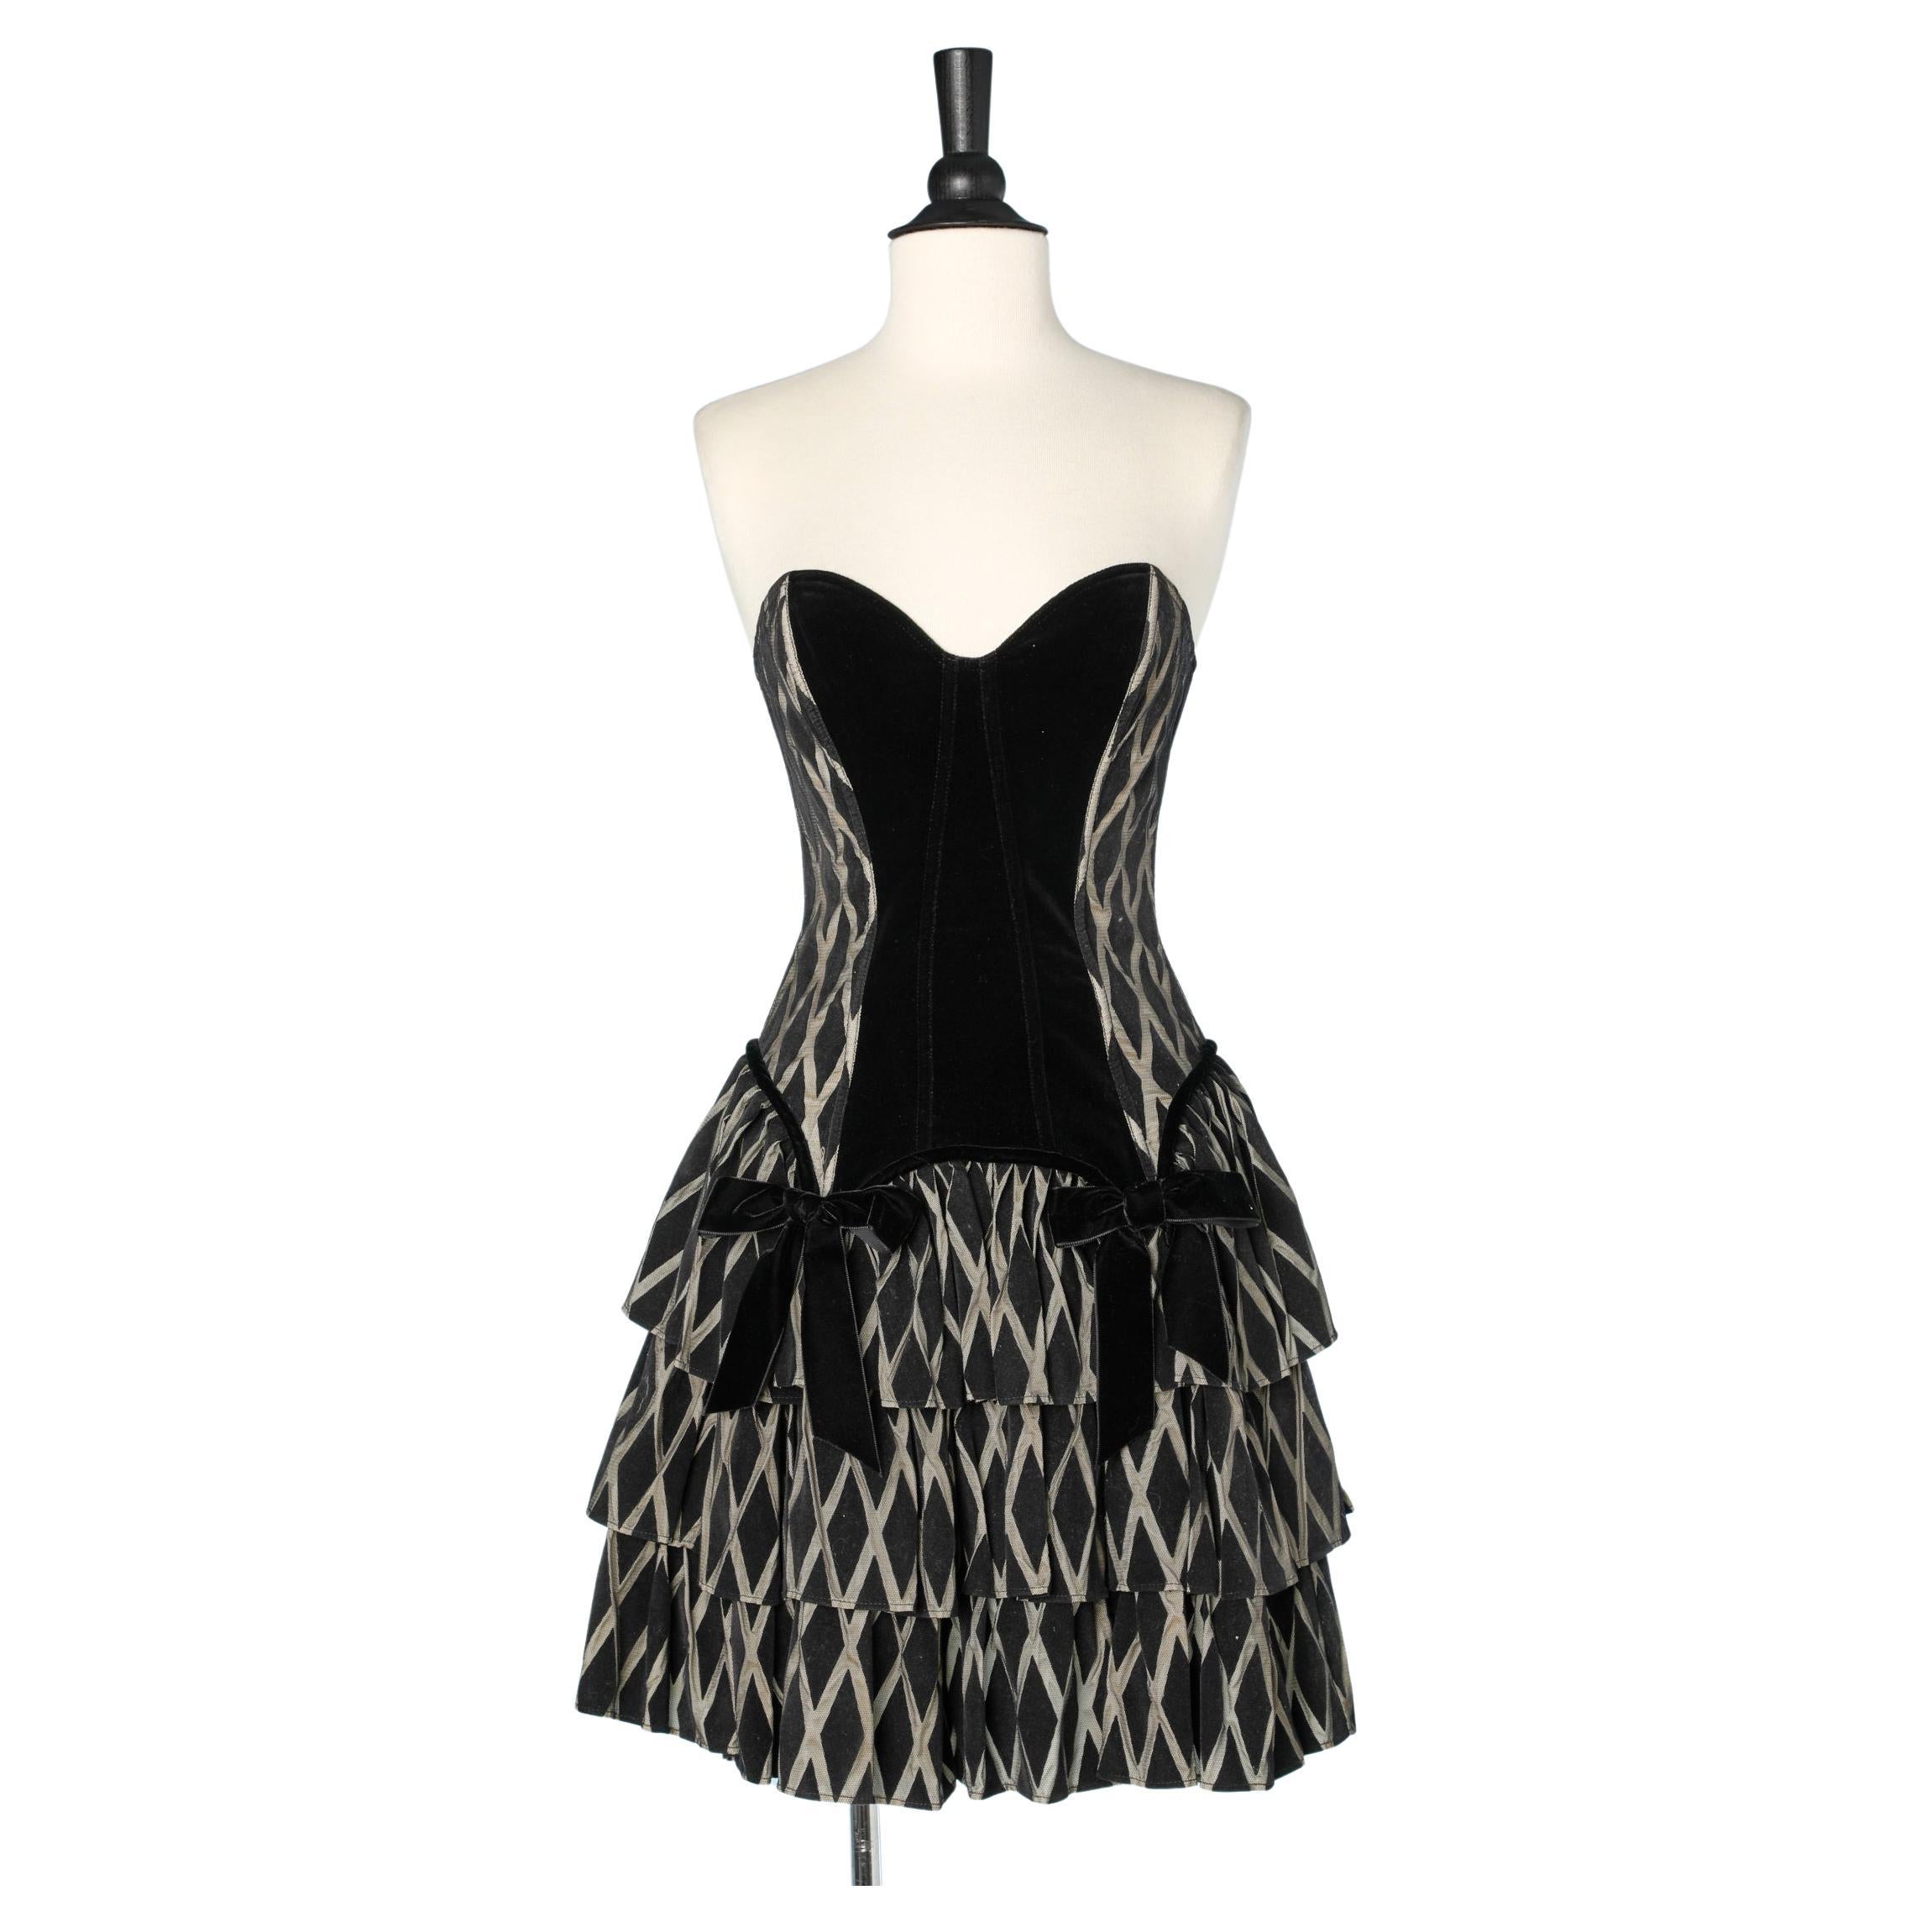 Harlequin bustier dress with ruffles,  velvet bust and bow Chantal Thomass 